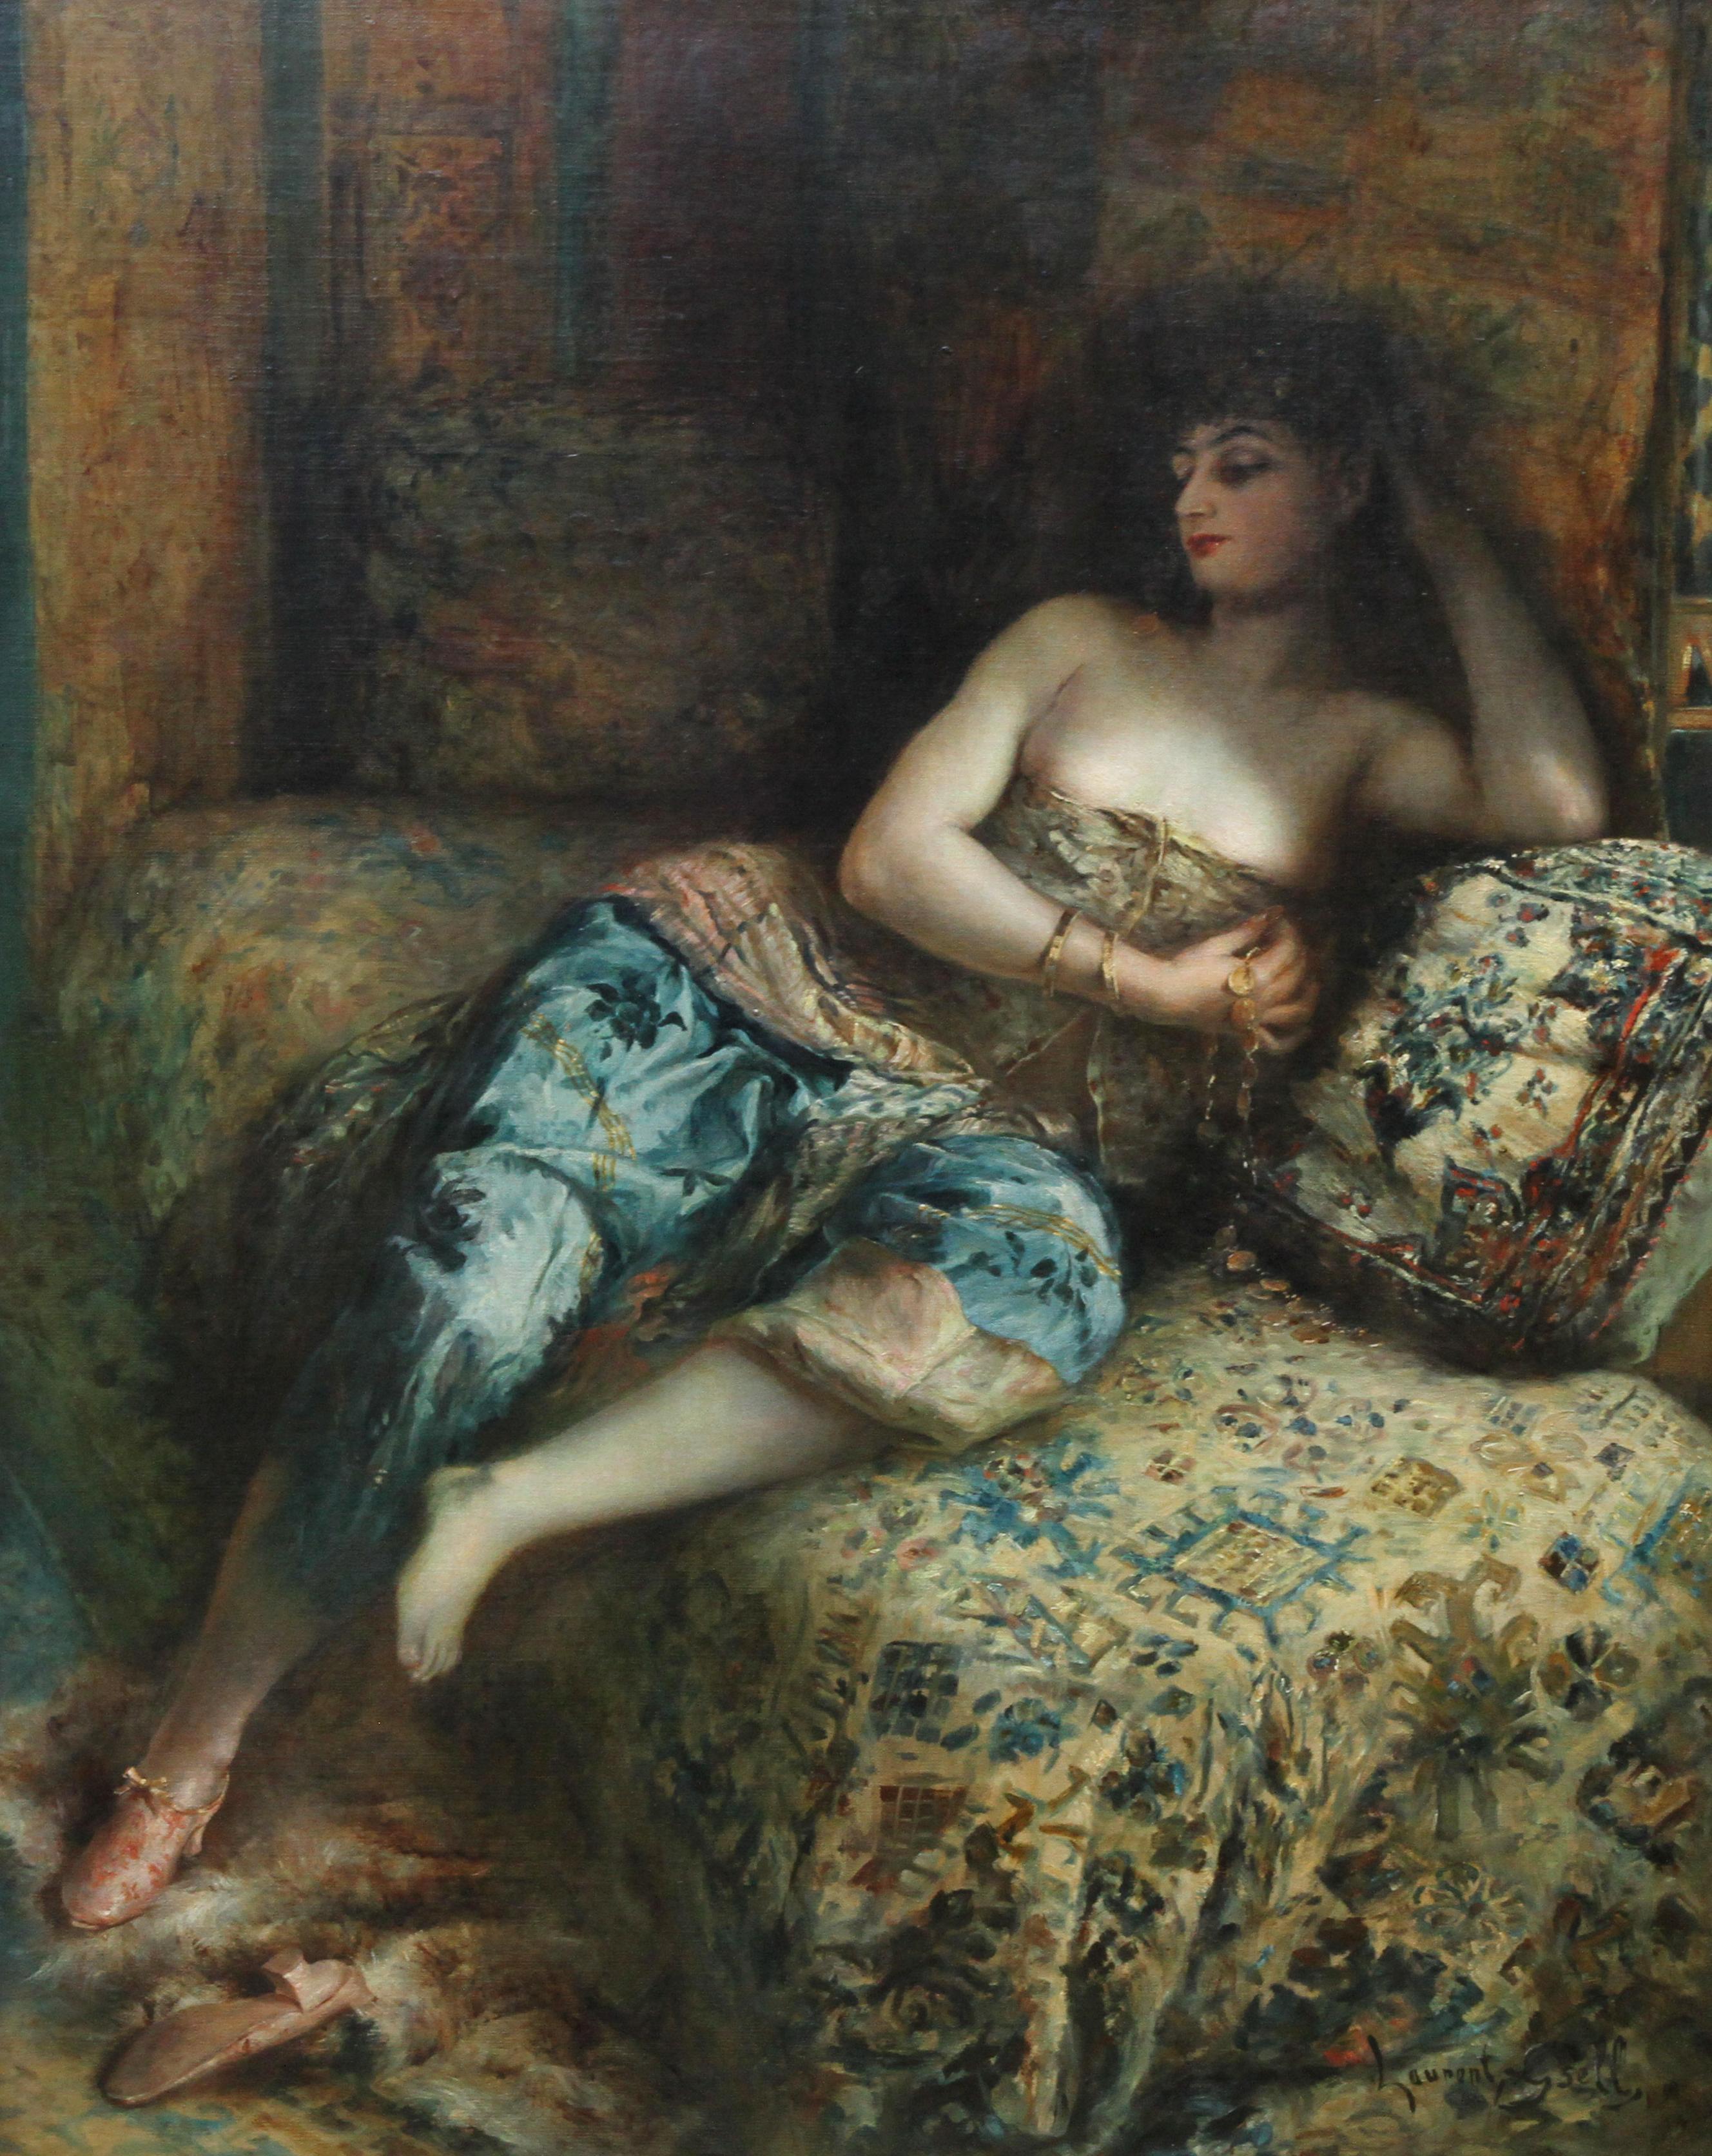 Odalisque - Woman in a Harem - French 1900 Orientalist art portrait oil painting - Painting by Lucien Laurent Gsell